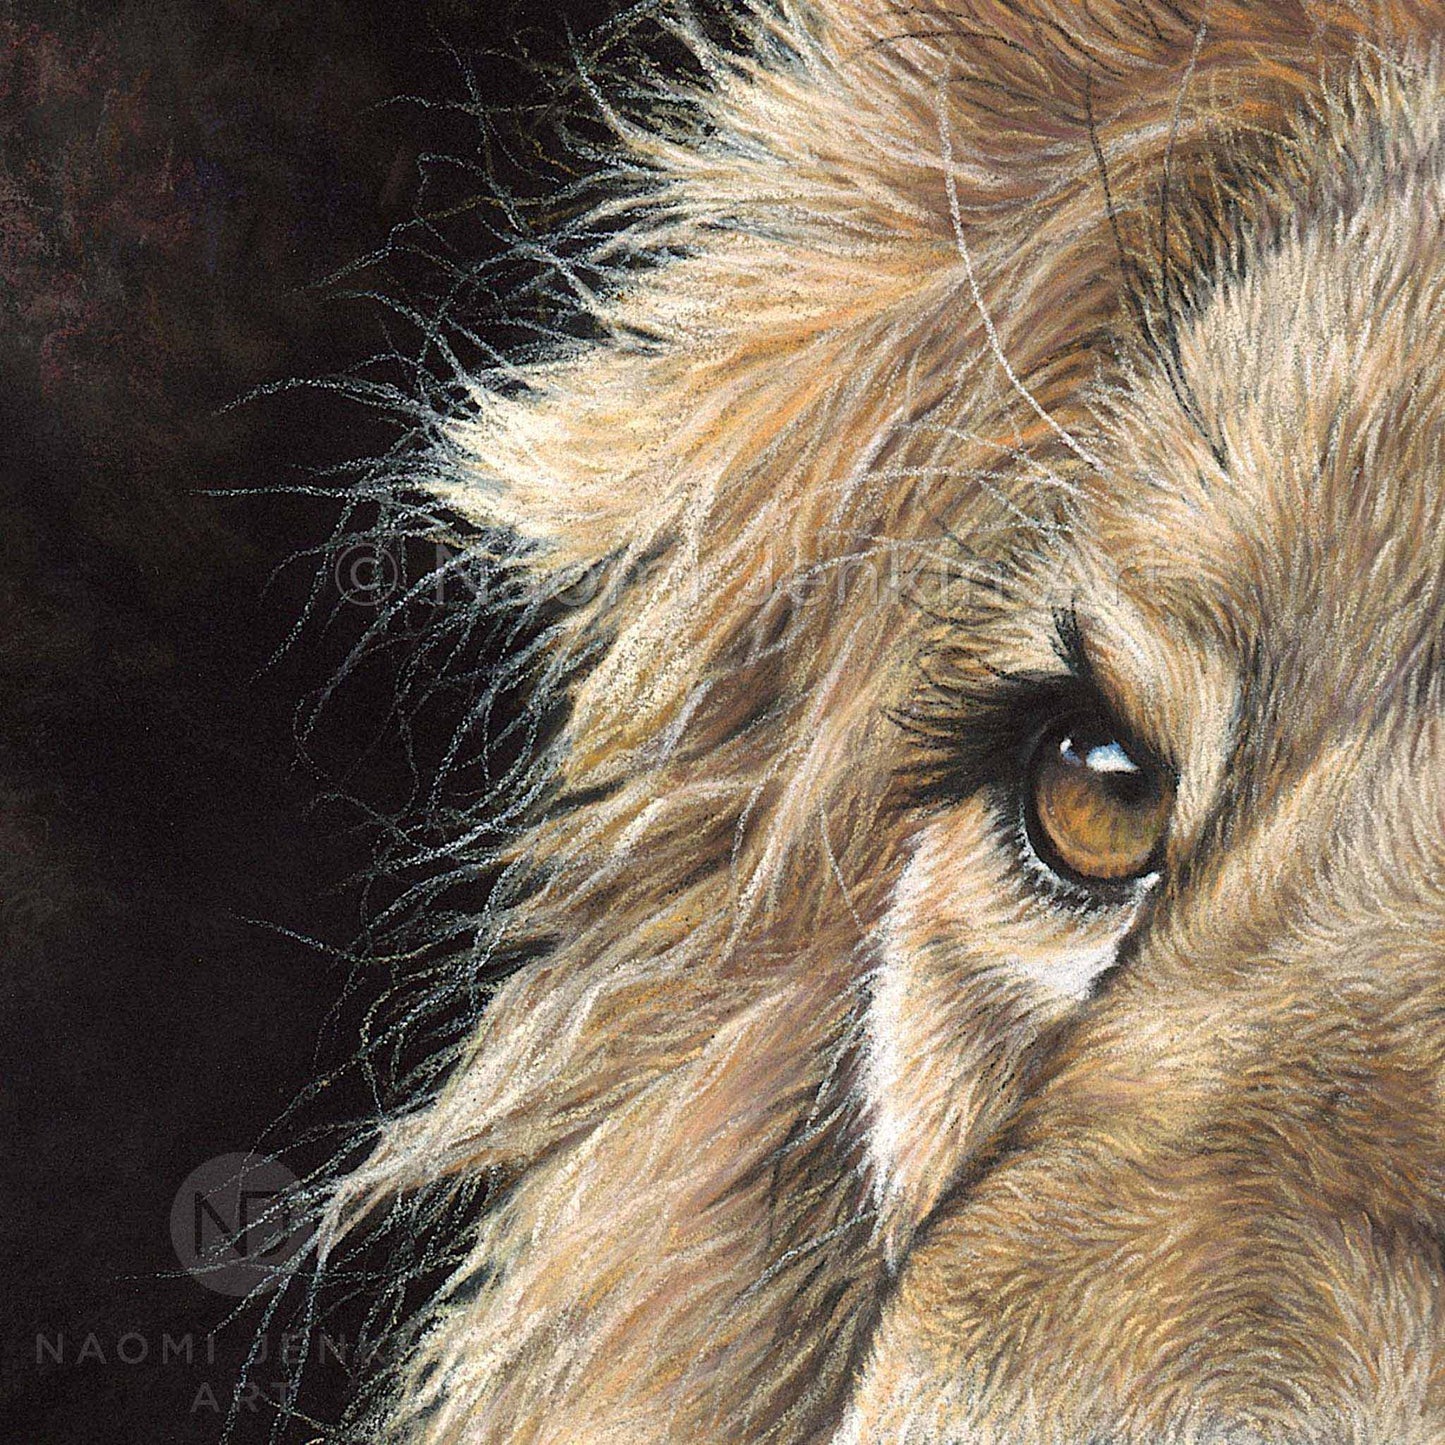 Close up lion face drawing from the print 'Watchful Eyes' by Naomi Jenkin